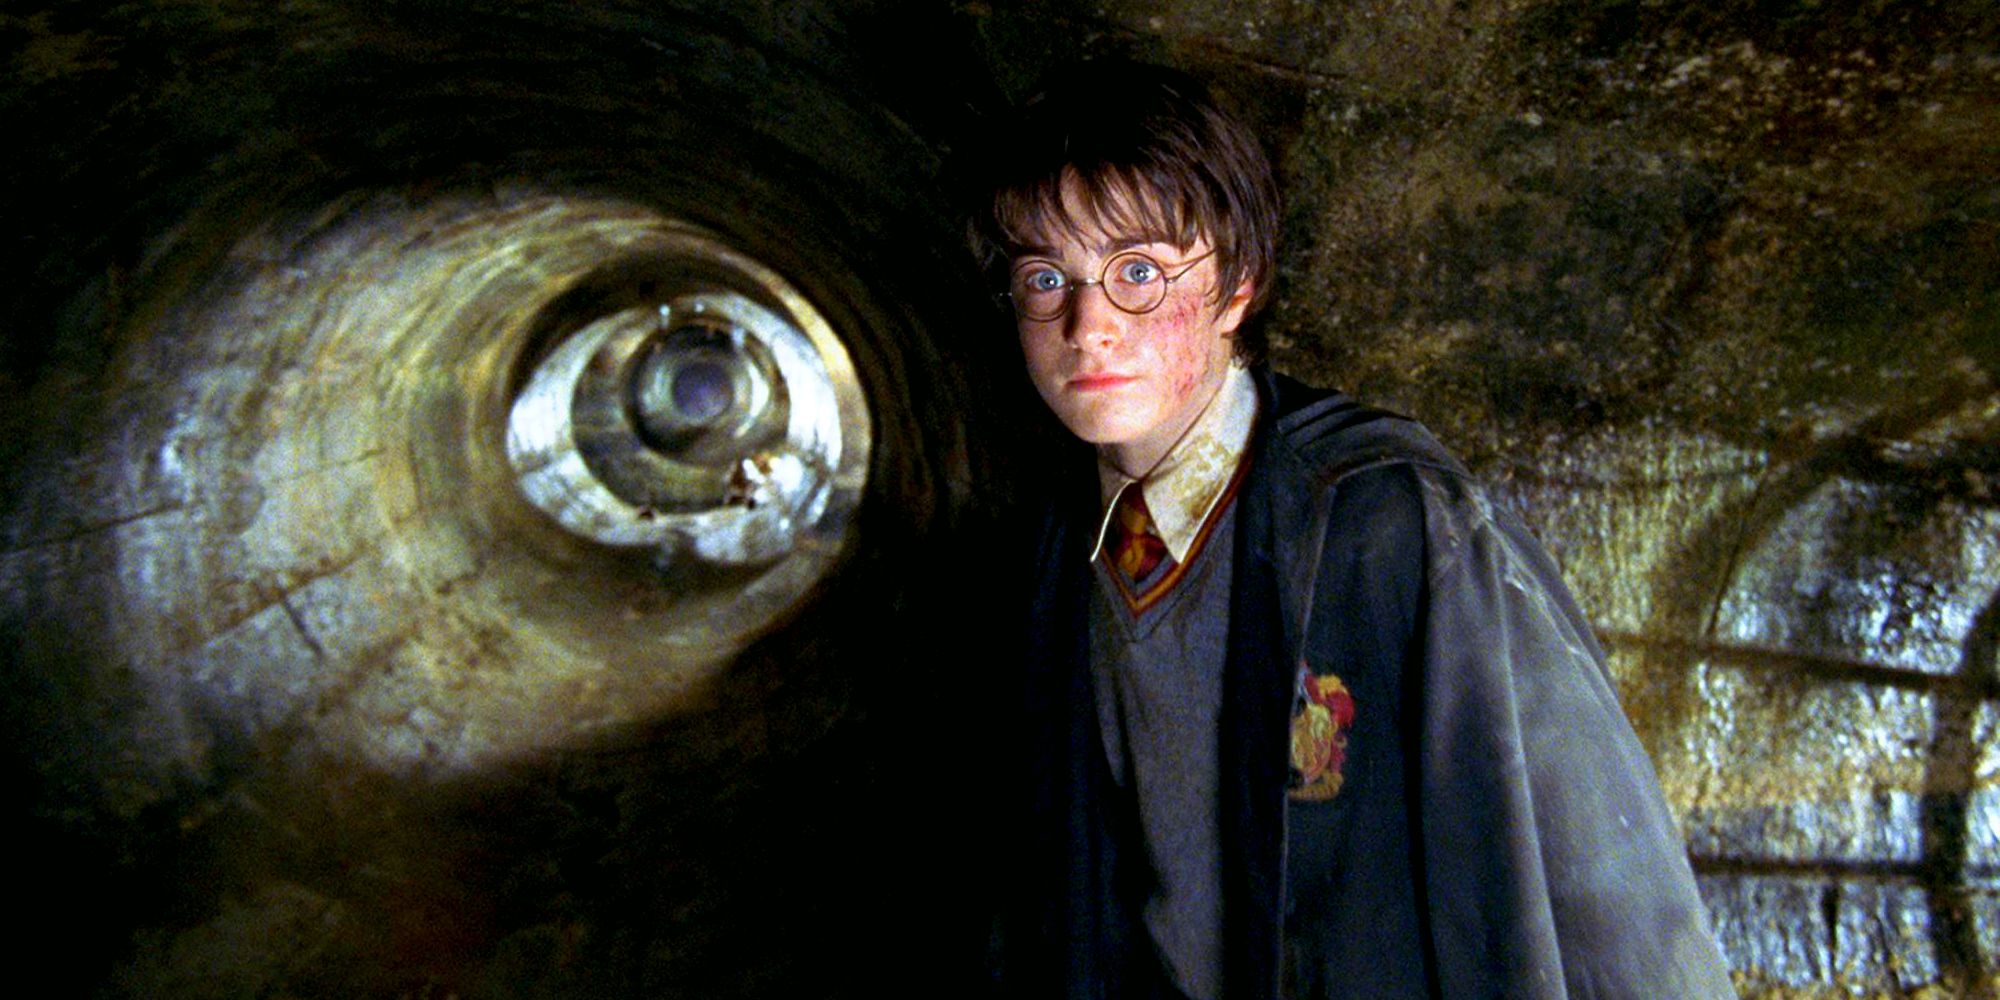 Harry standing in the pipes within the Chamber of Secrets in Harry Potter